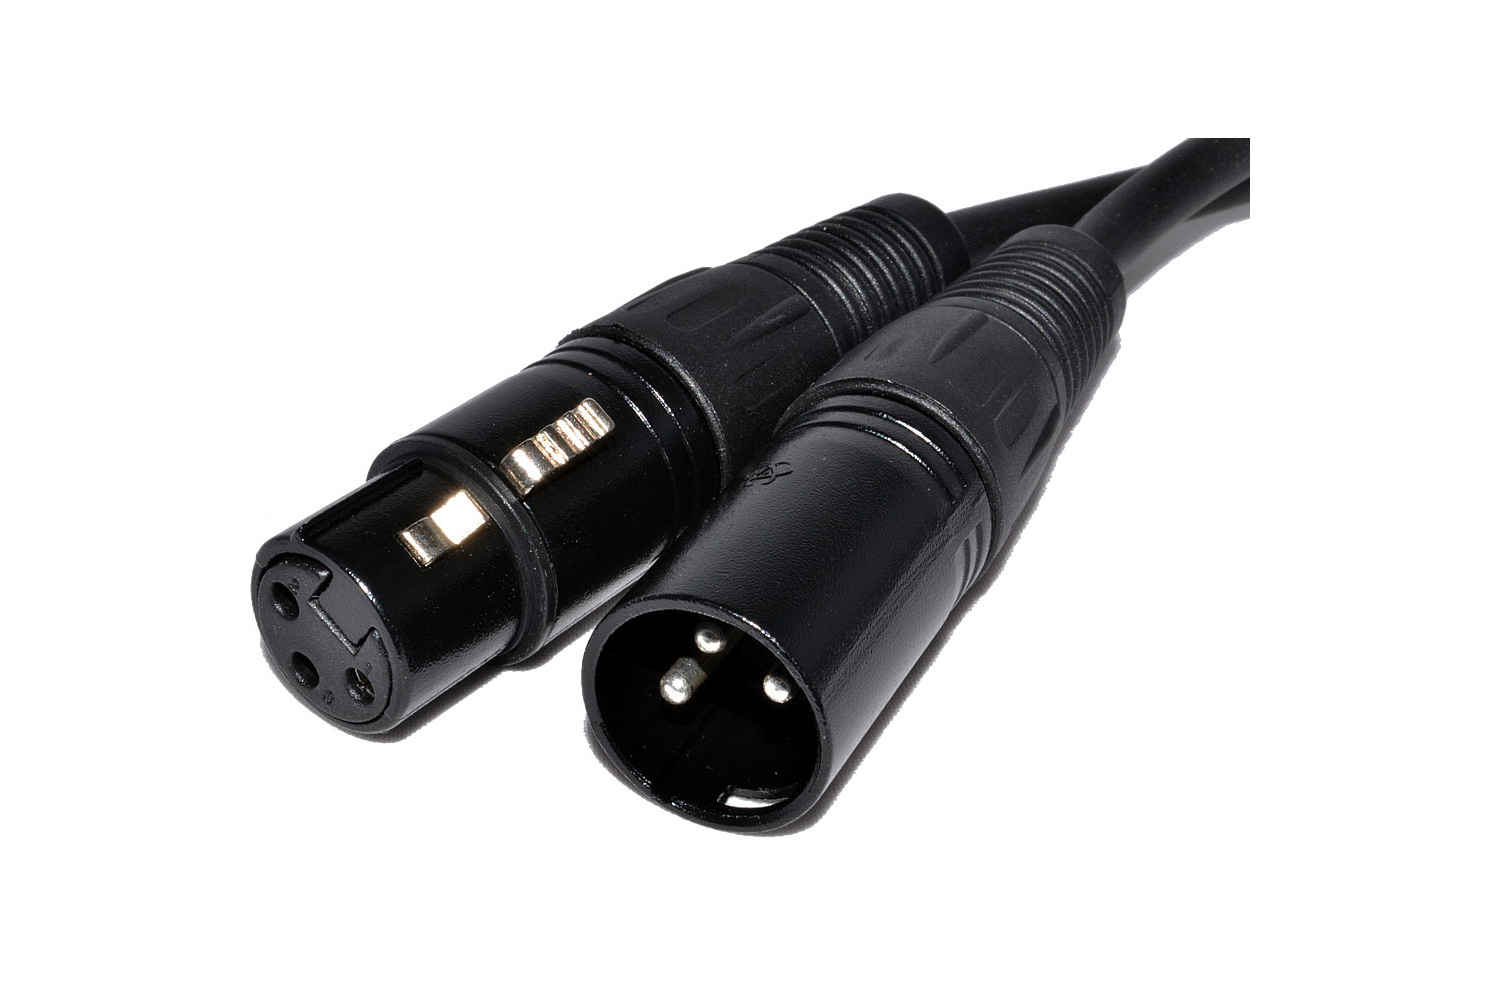 XLR Cable for Microphone